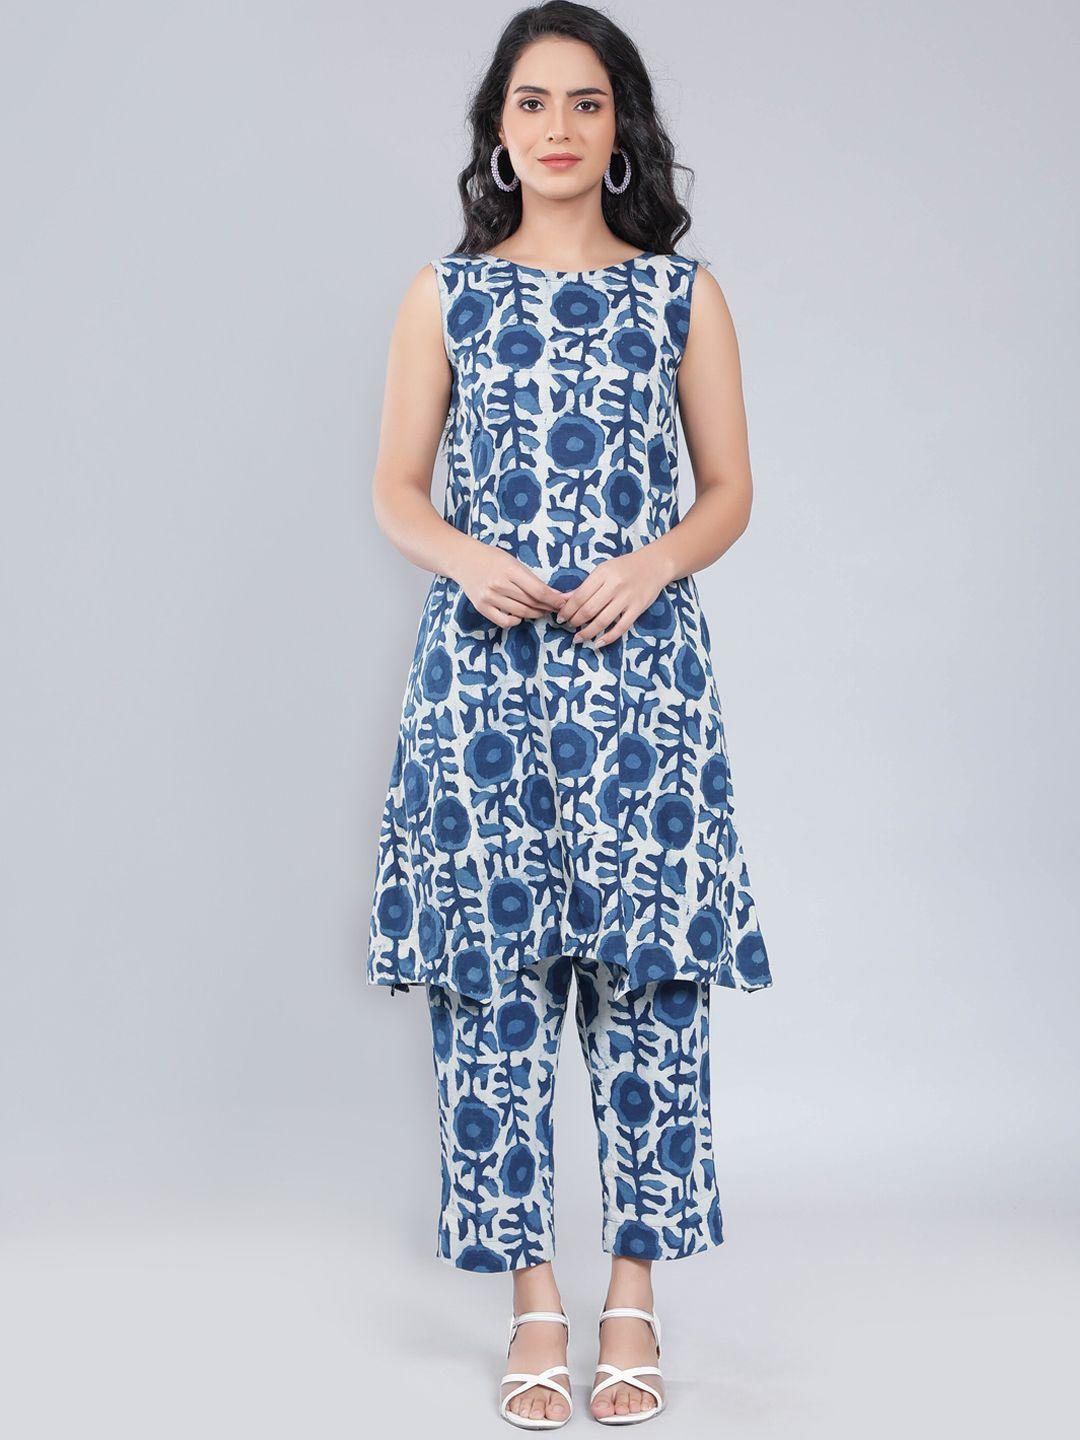 sajke floral printed pure cotton a-line kurta with trousers